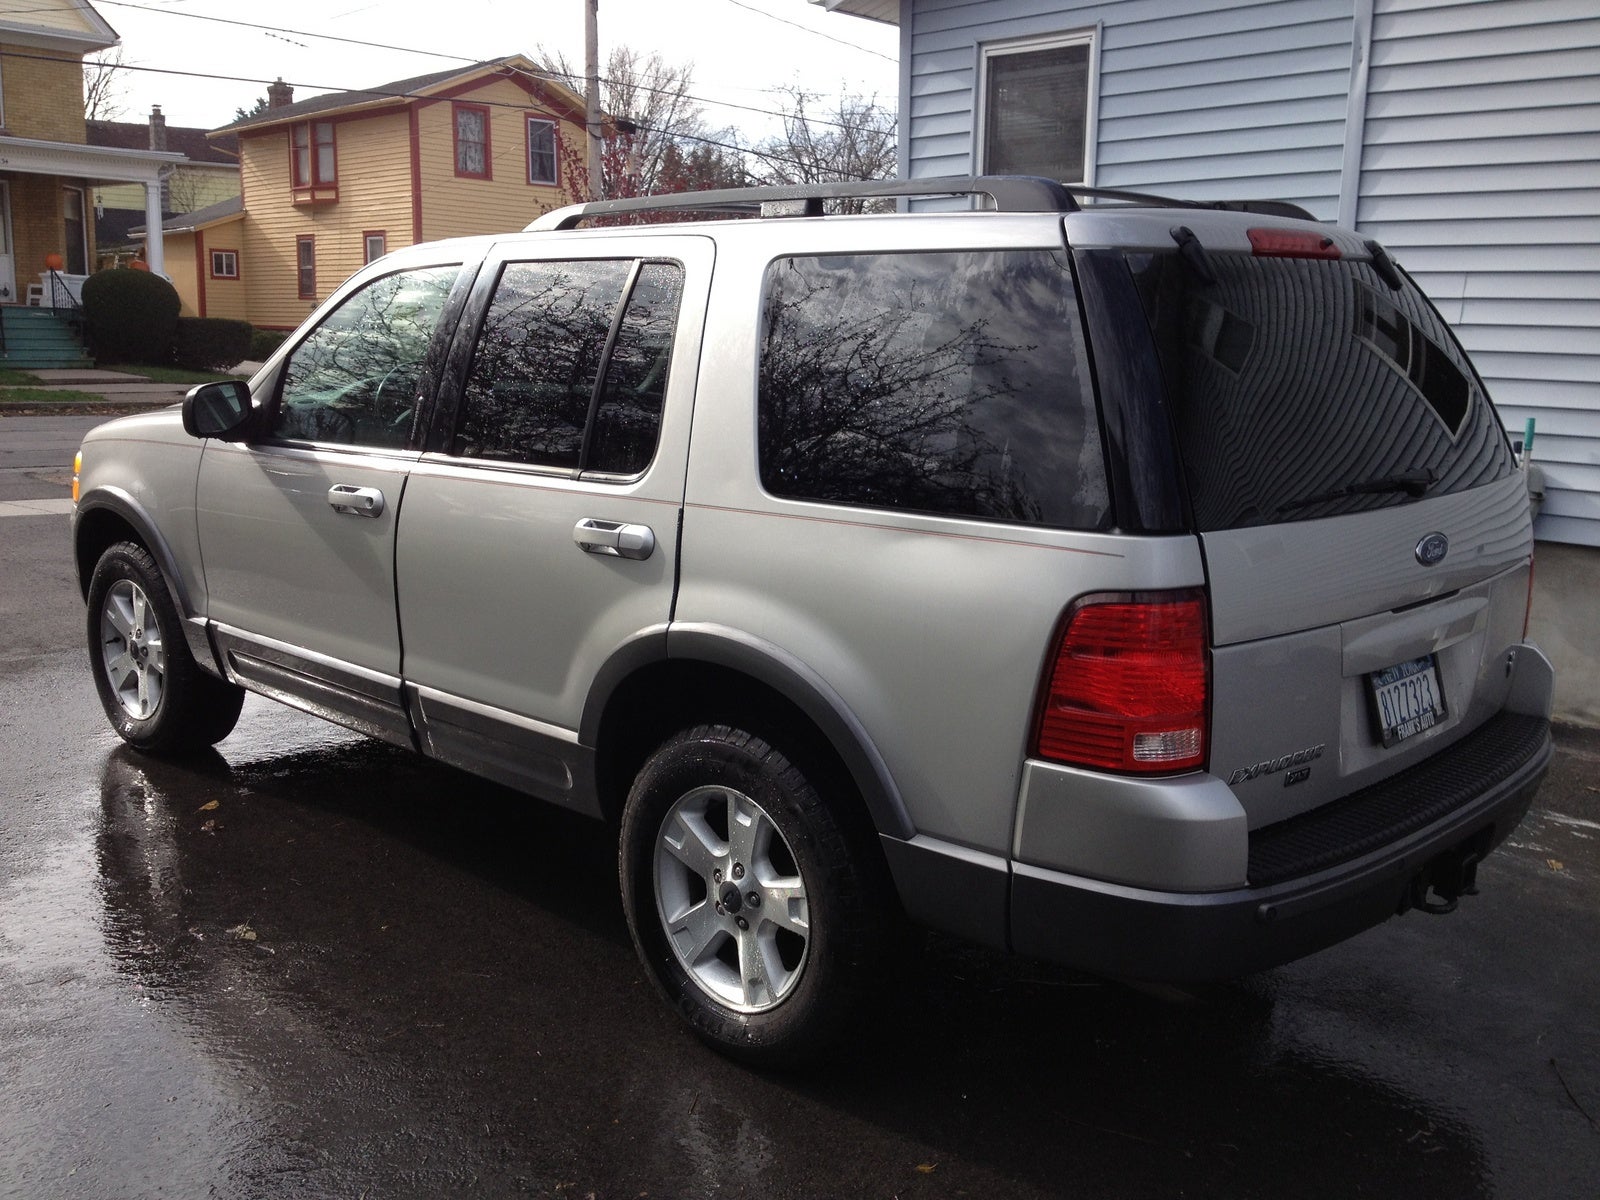 2004 Ford explorer xlt v8 towing capacity 2003 Ford Explorer V8 Towing Capacity